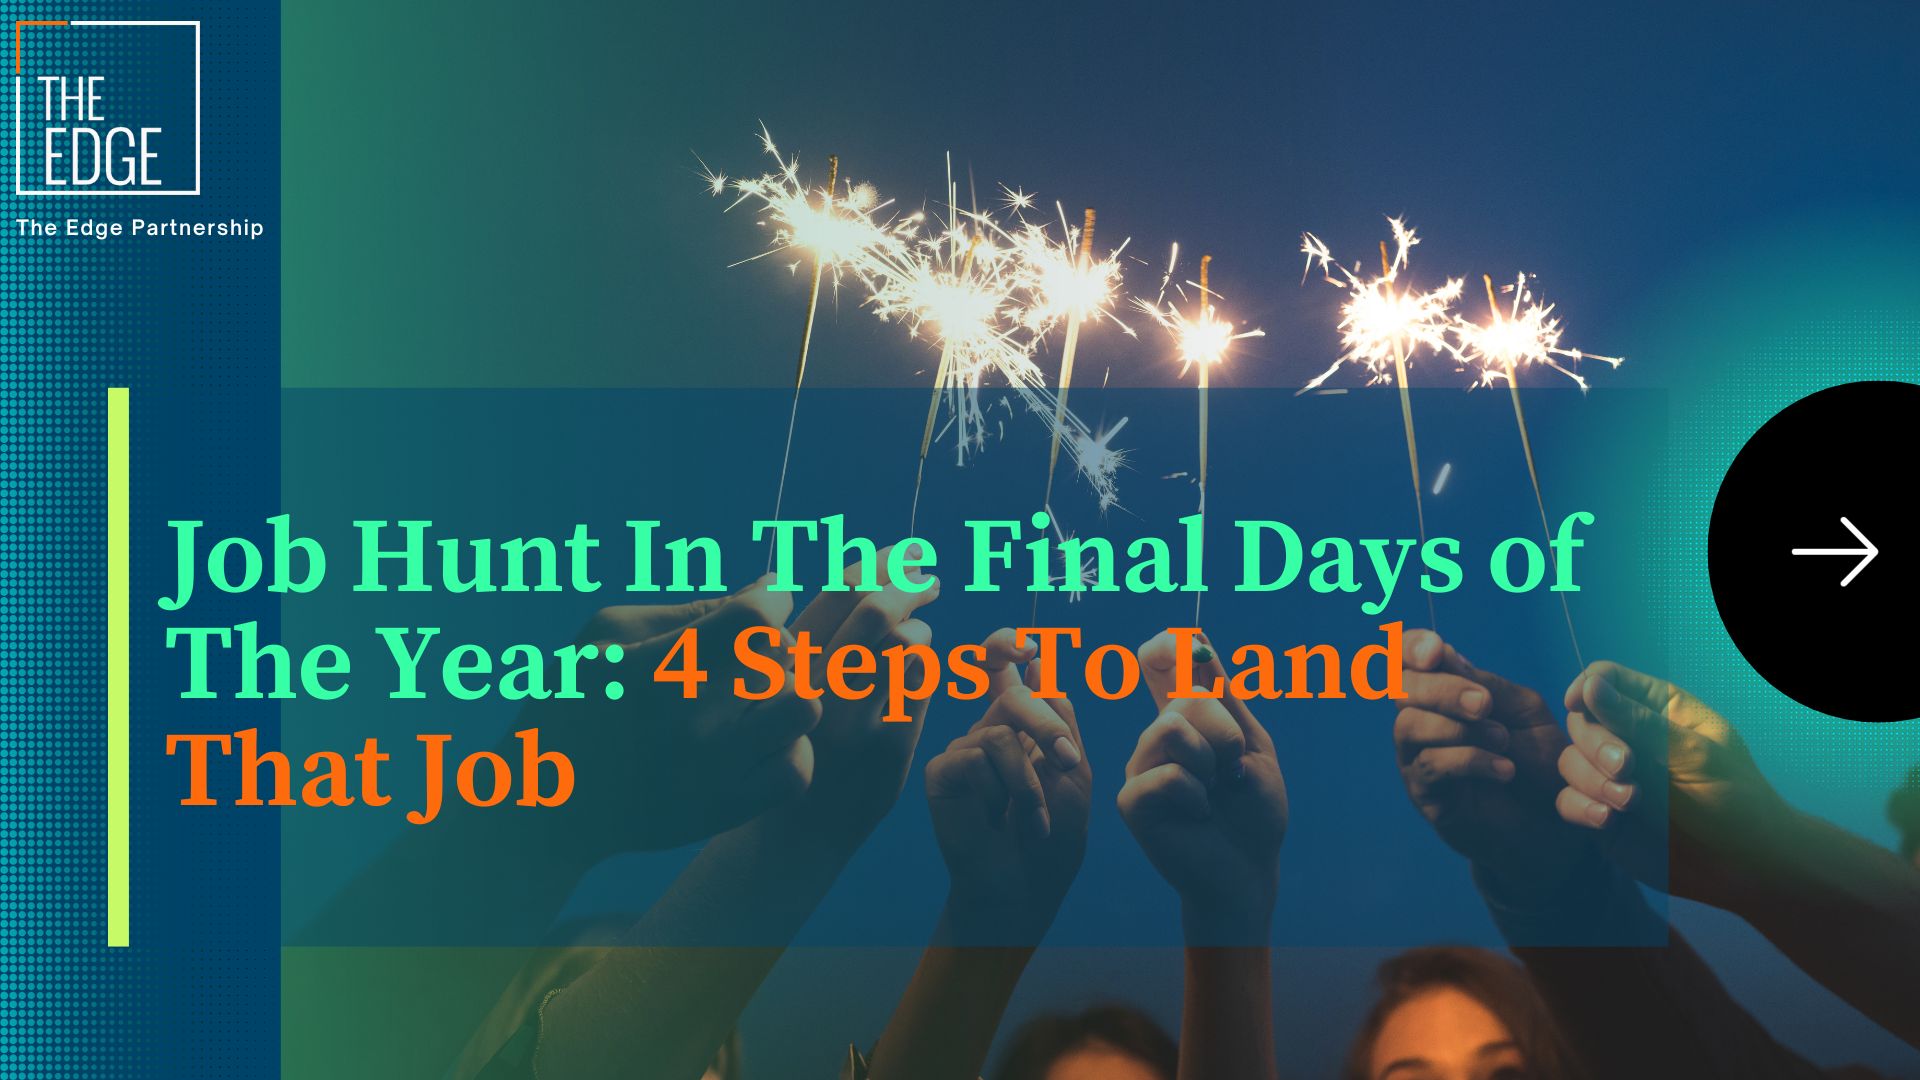 Job Hunt In The Final Days of The Year: 4 Steps To Land That Job